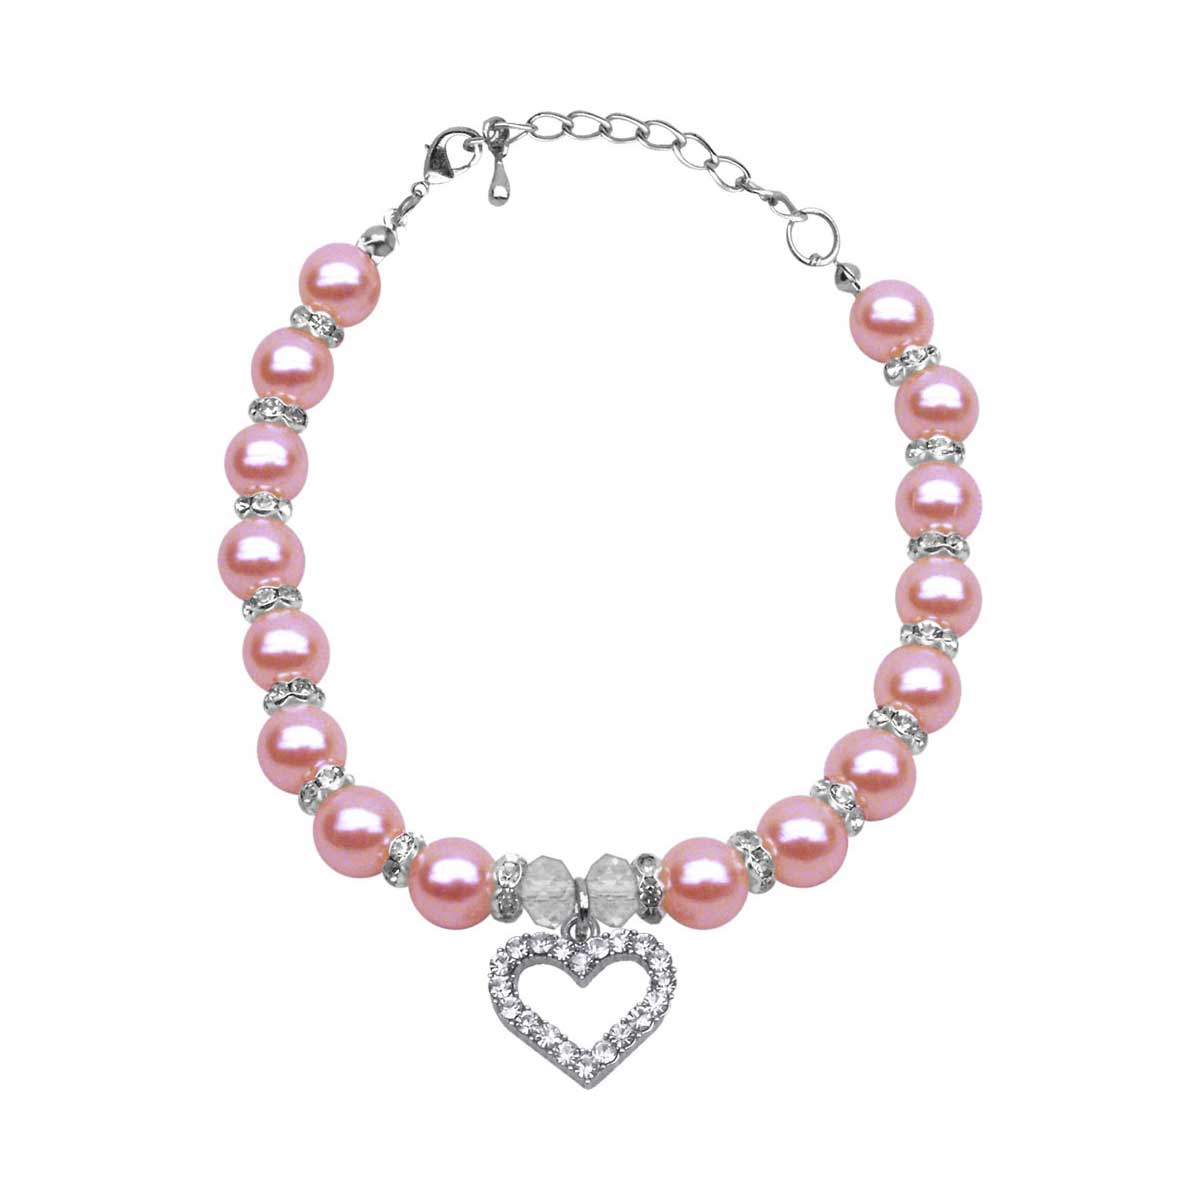 Crystal Heart Necklace with Rose Pearls | Pawlicious & Company